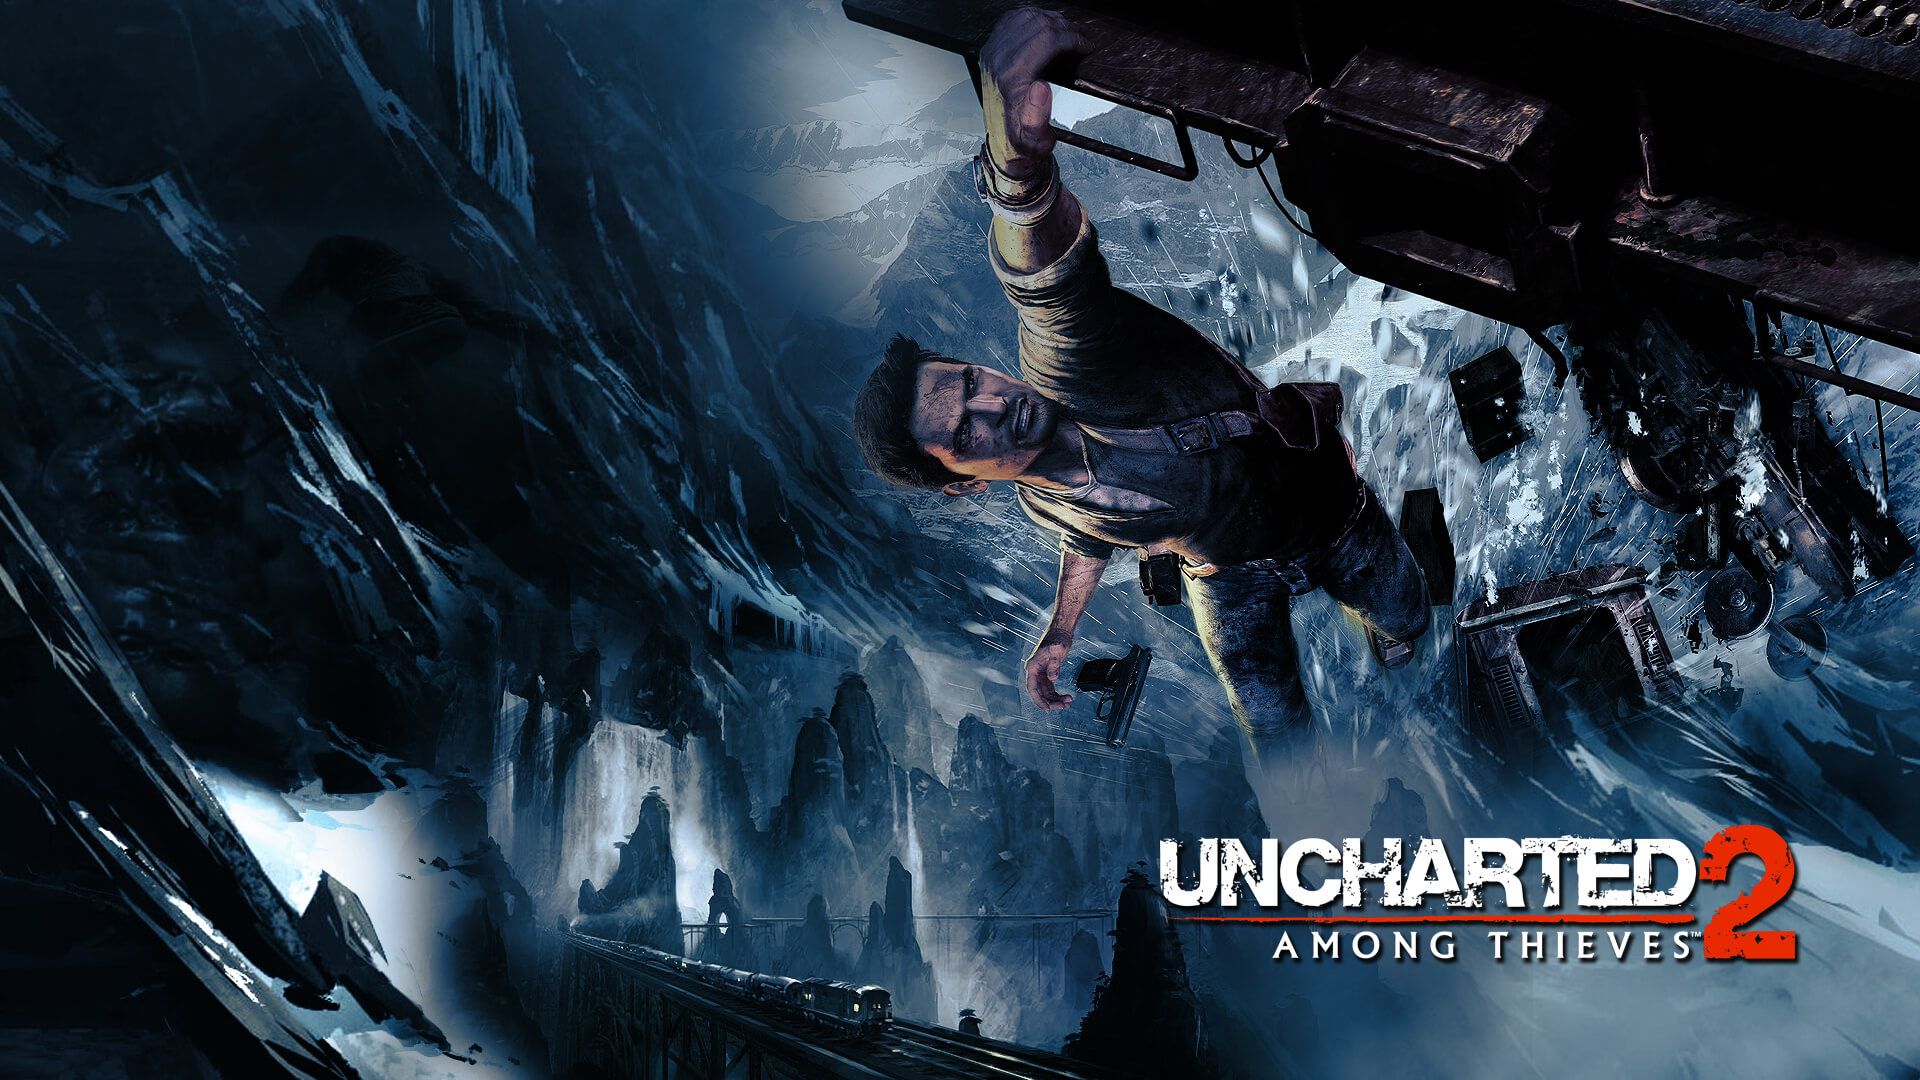 Uncharted 2 Hanging on Train